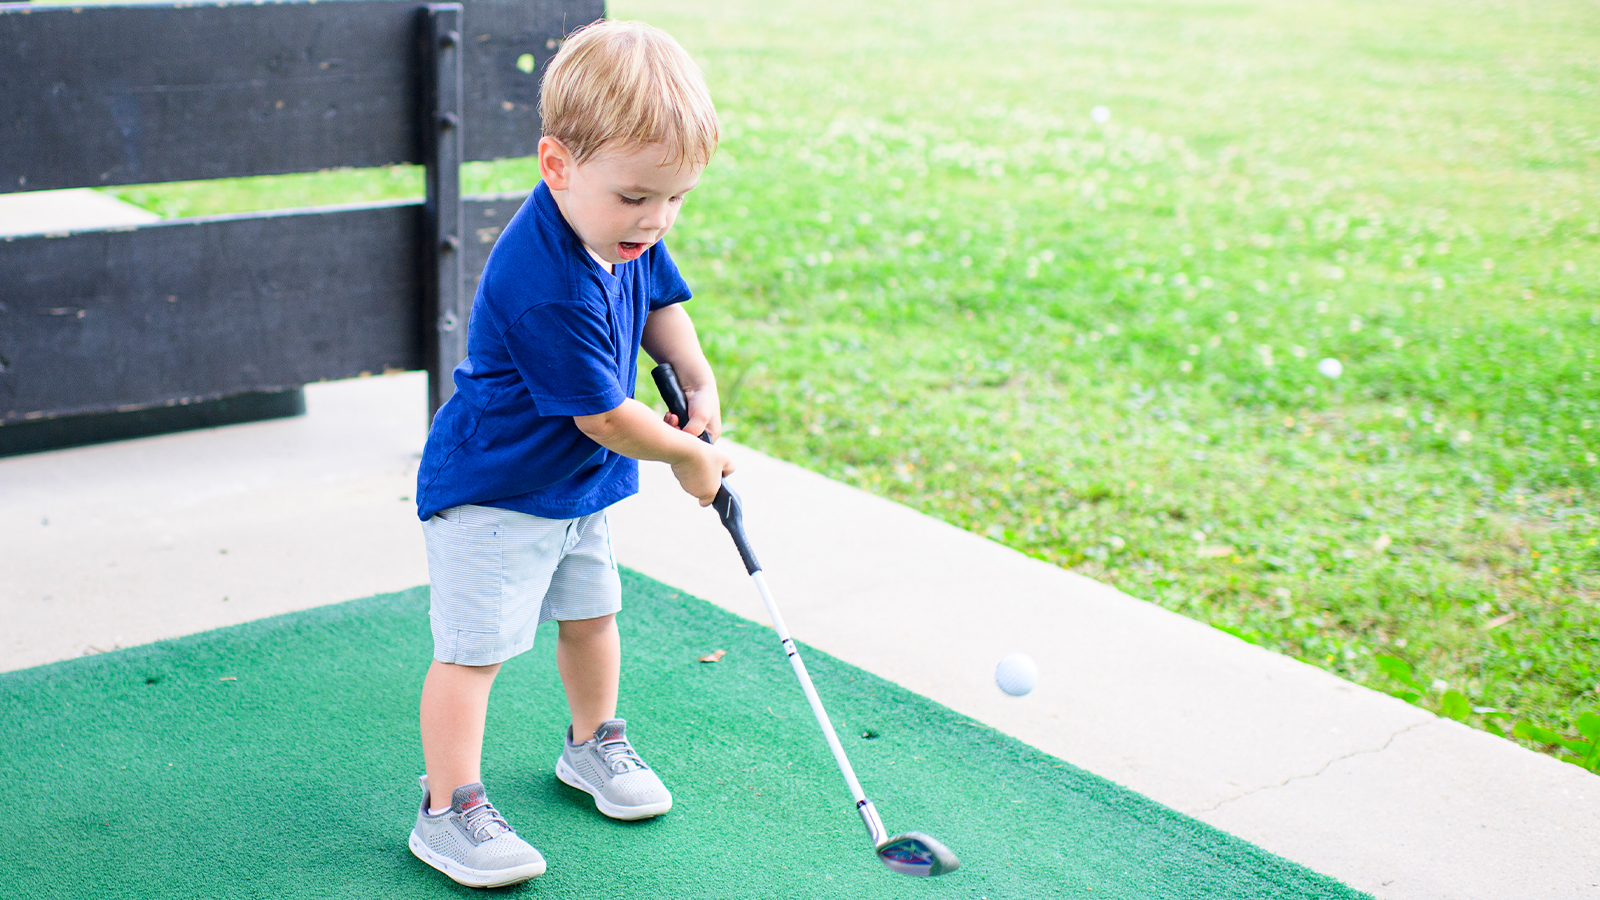 Golf is a family affair for the Williamsons, including their two year old son. 